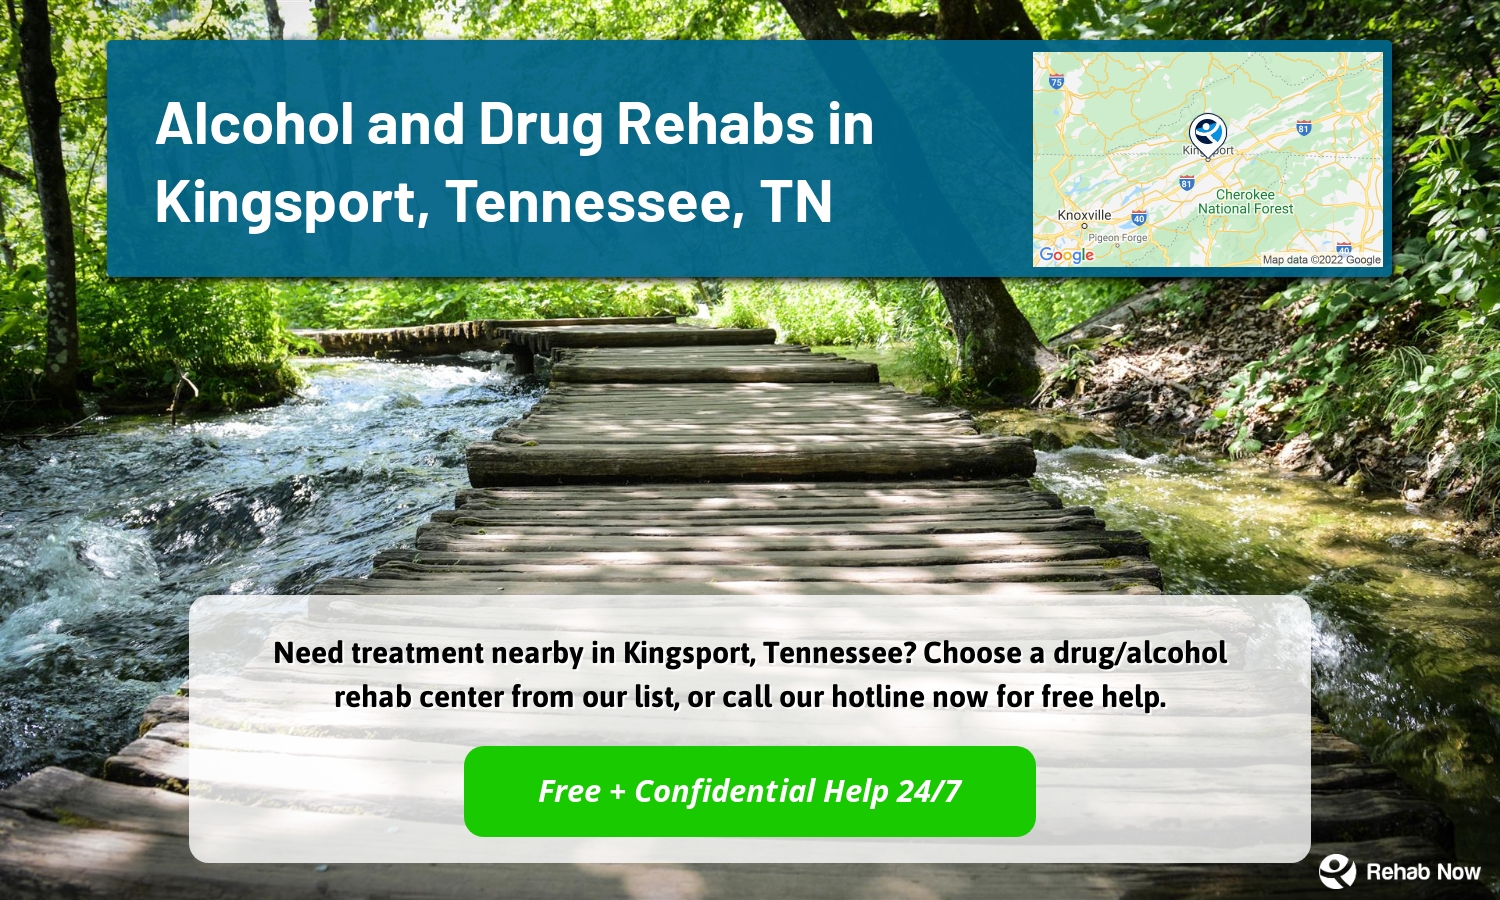 Need treatment nearby in Kingsport, Tennessee? Choose a drug/alcohol rehab center from our list, or call our hotline now for free help.